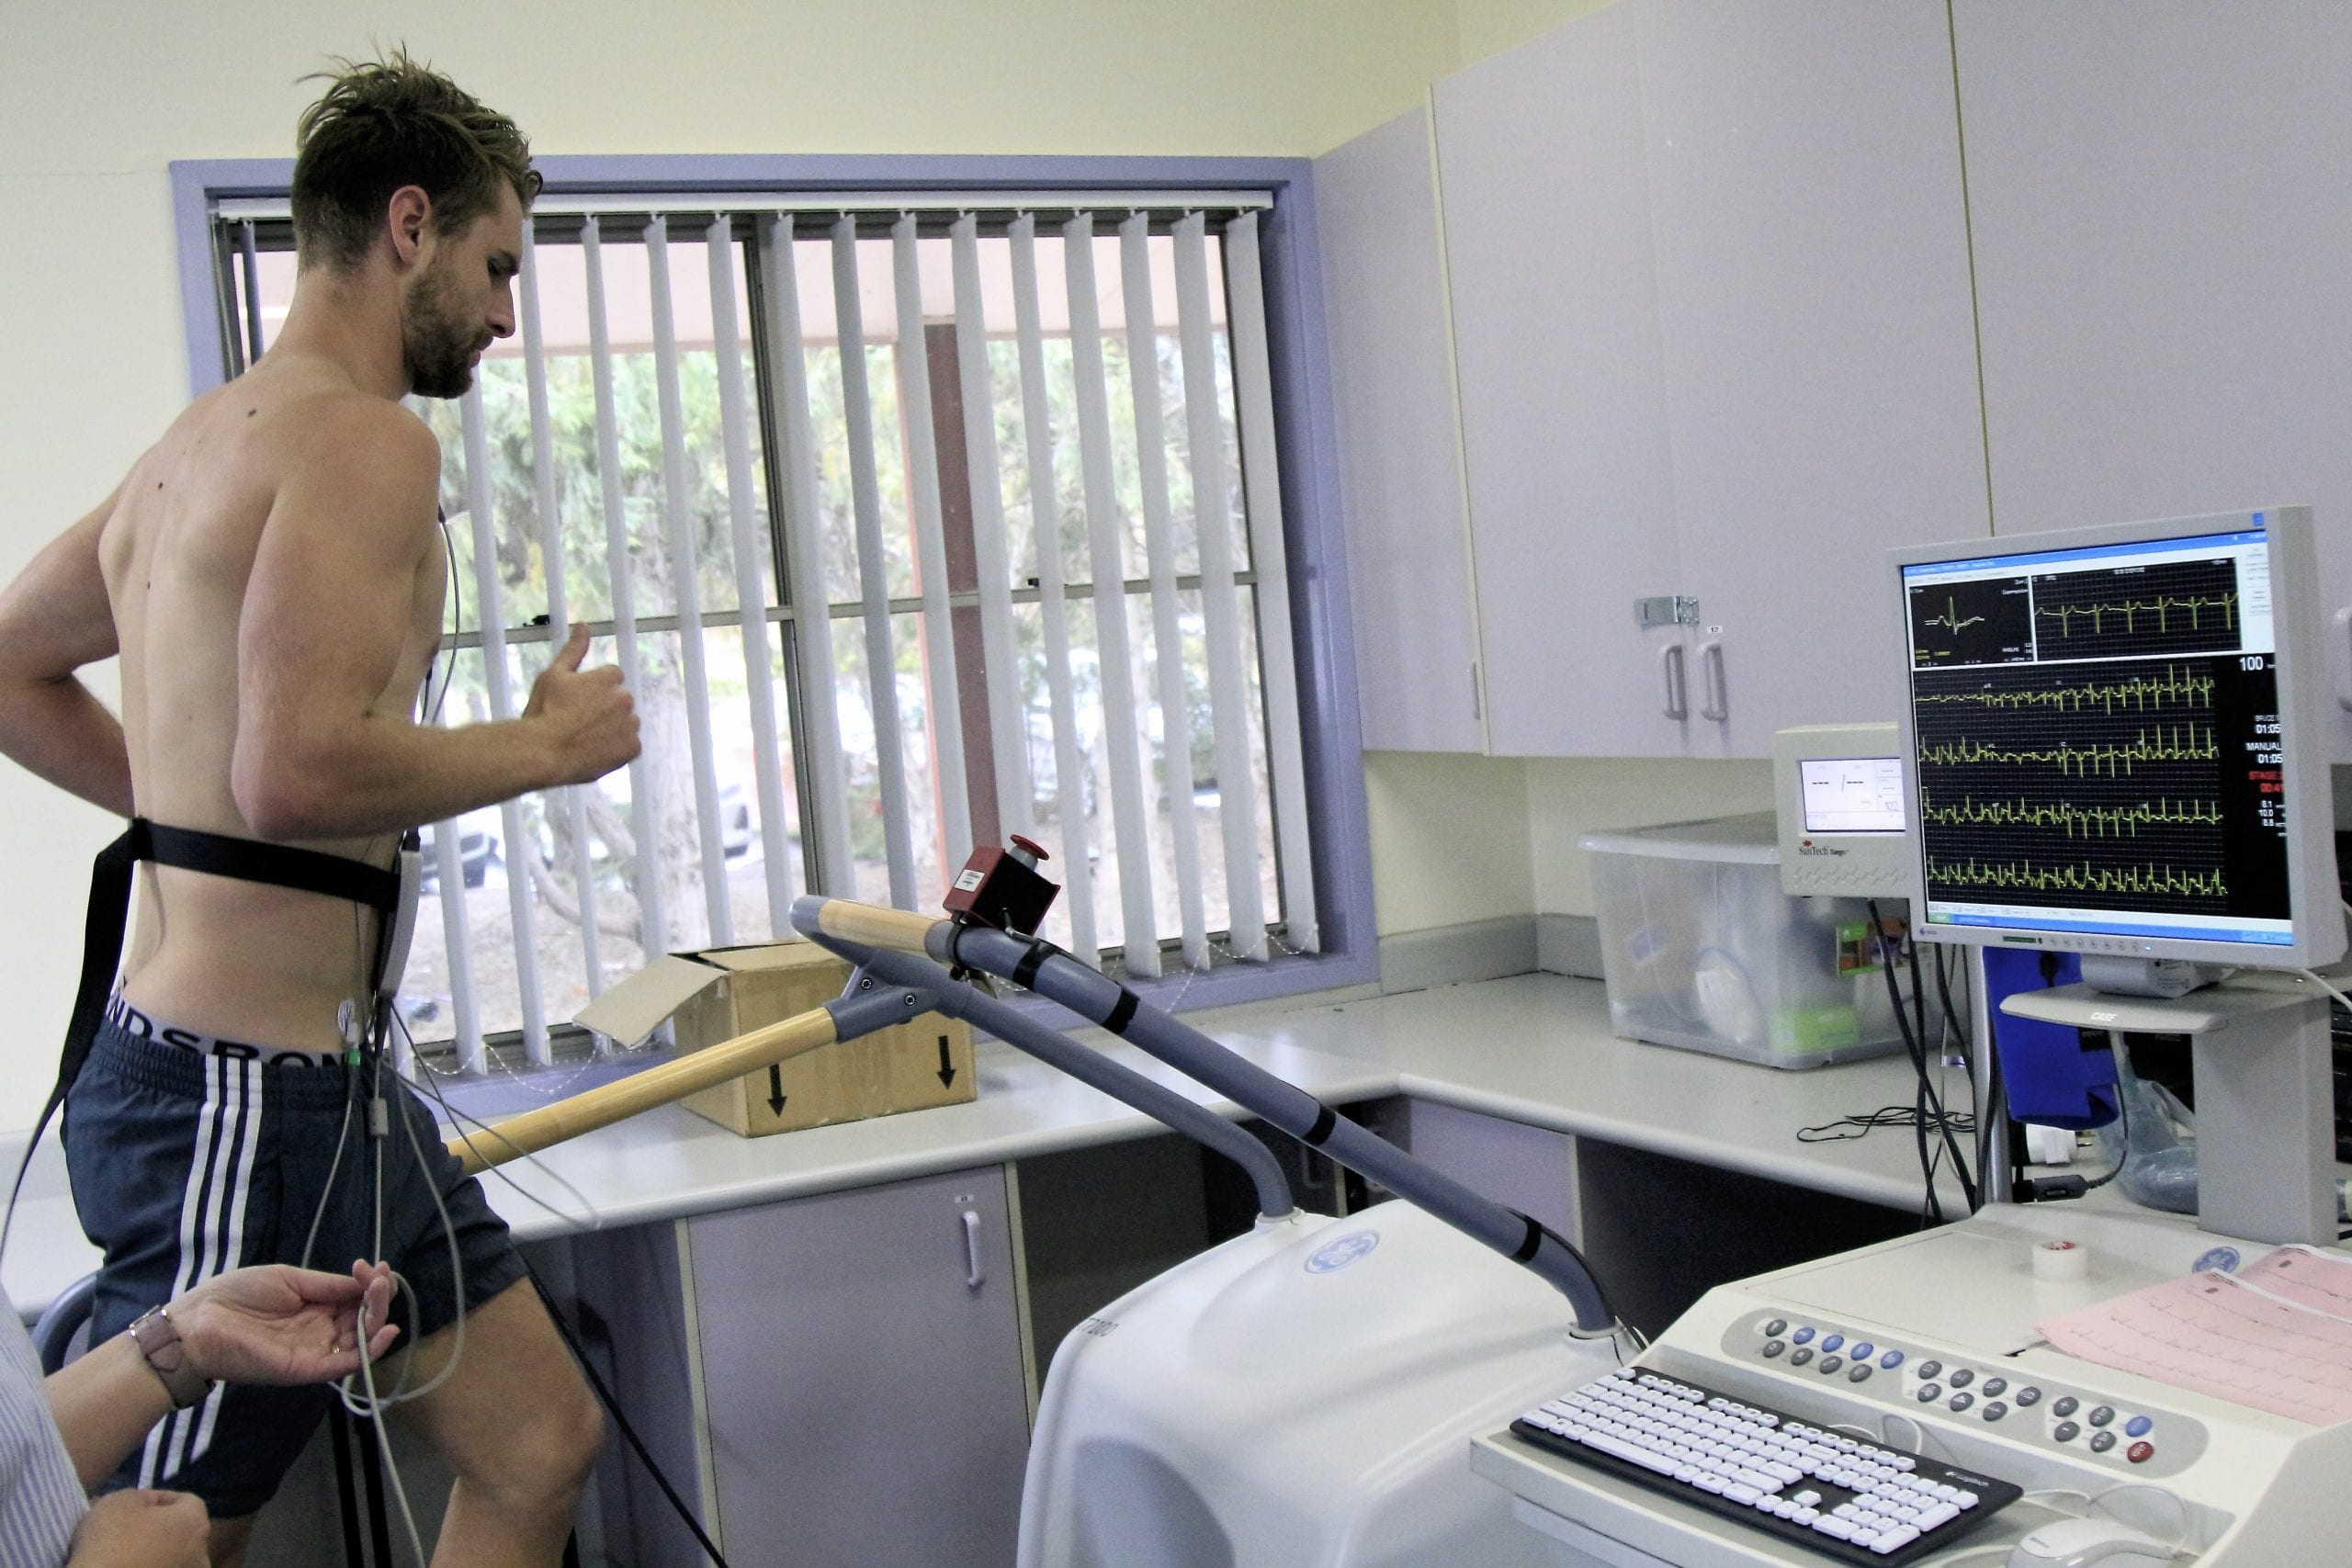 Harry Marsh jogging on a treadmill with machines hooked up